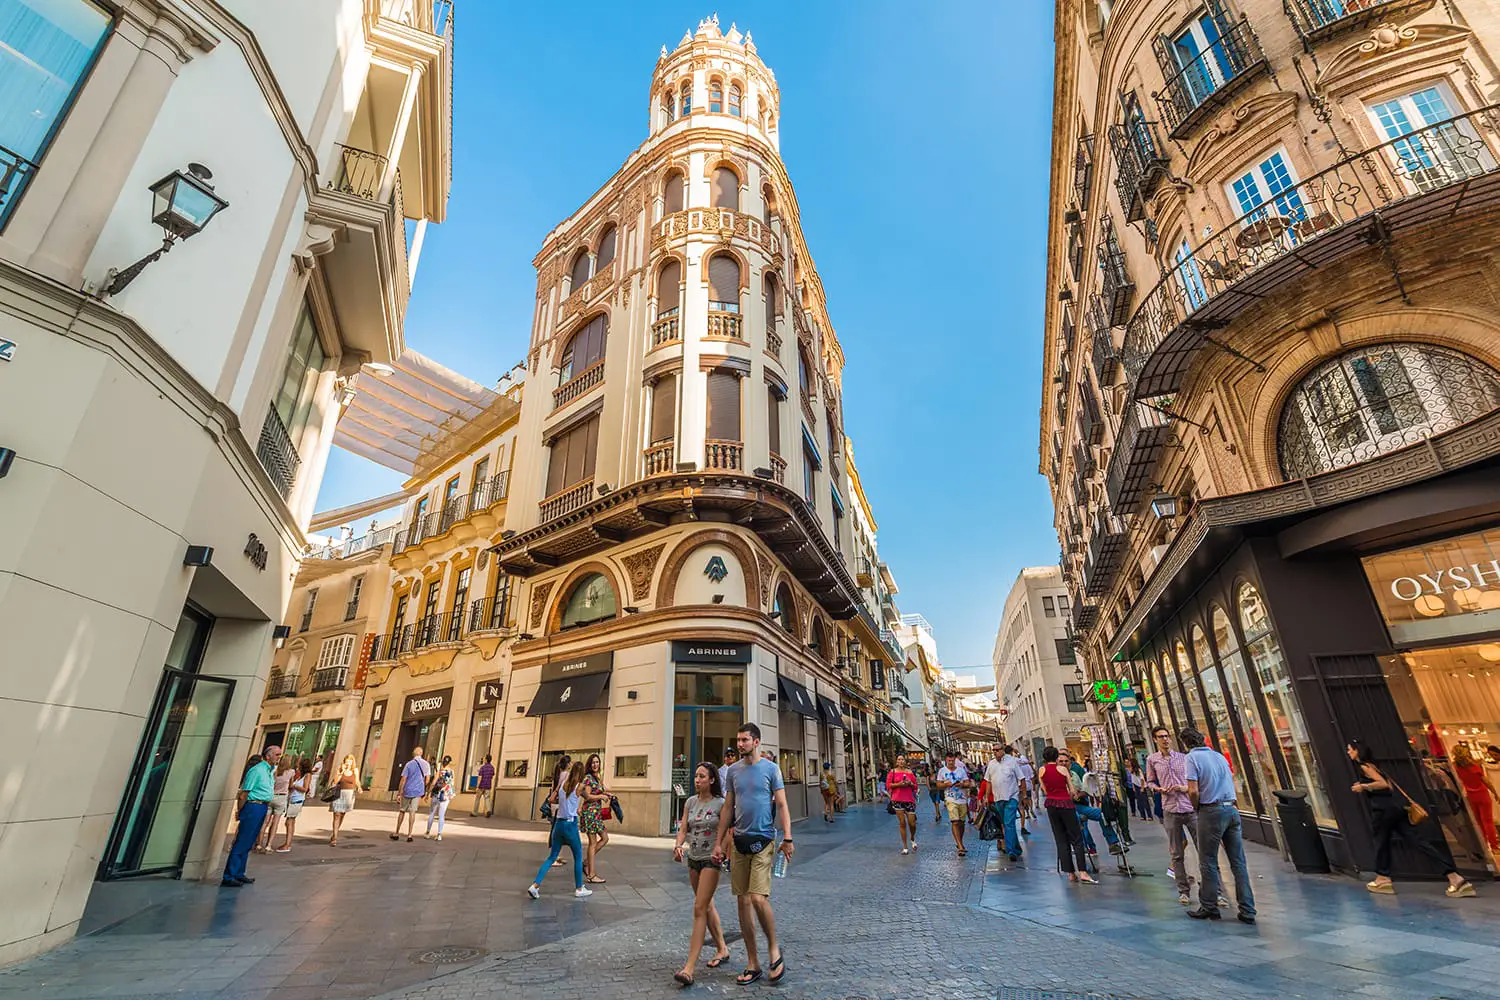 Calle Sierpes is a traditional and busy shopping street in the Spanish city of Seville, Andalusia, Spain